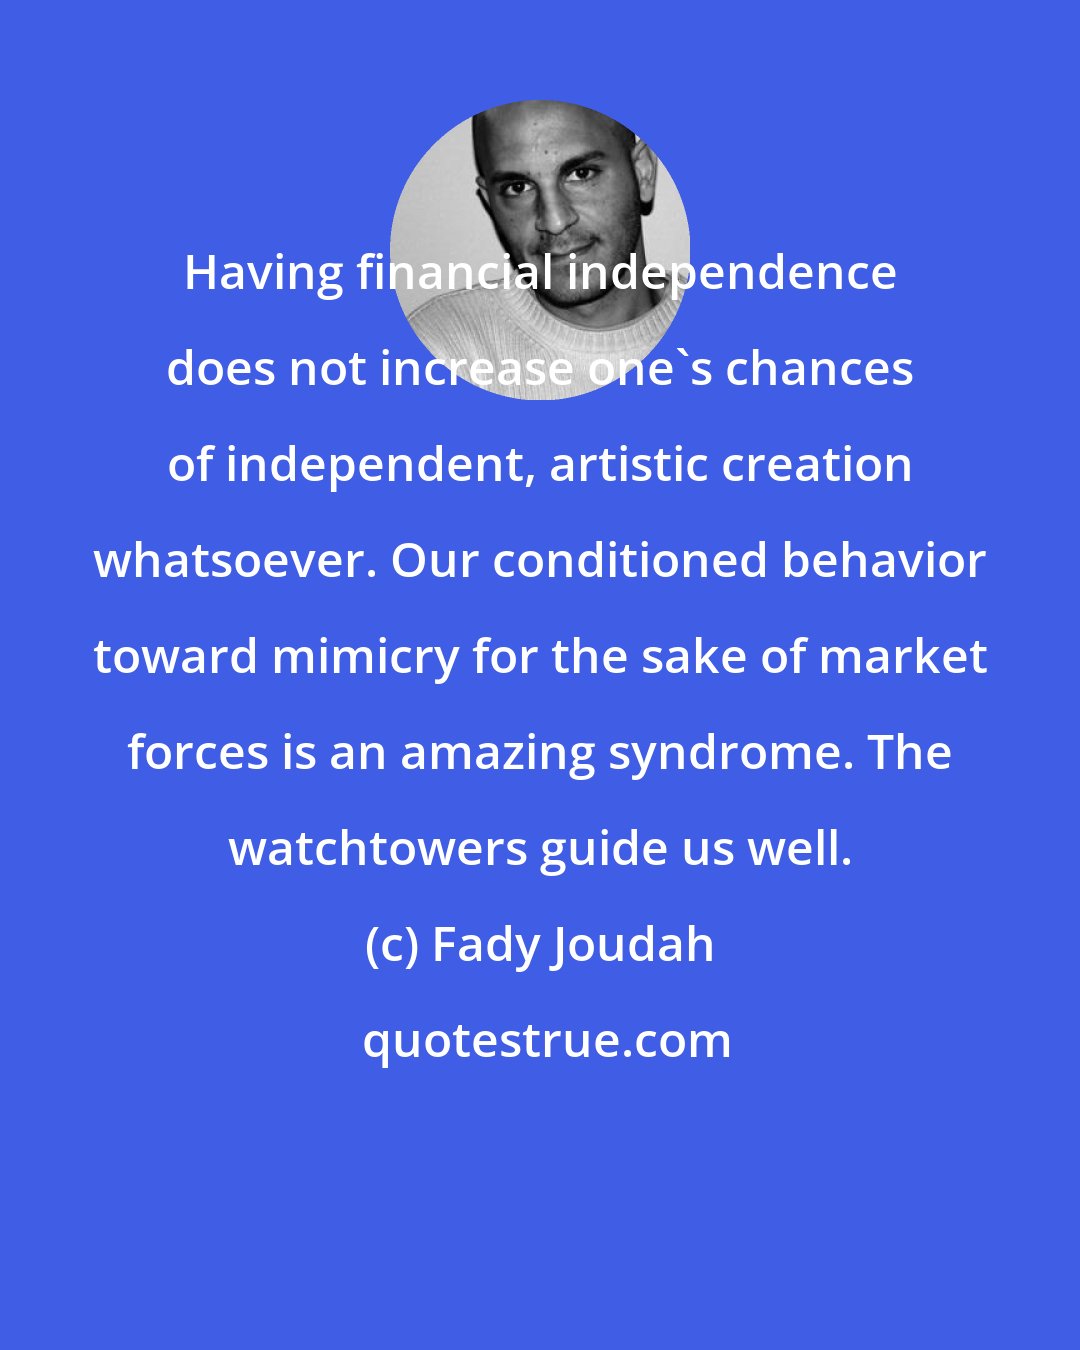 Fady Joudah: Having financial independence does not increase one's chances of independent, artistic creation whatsoever. Our conditioned behavior toward mimicry for the sake of market forces is an amazing syndrome. The watchtowers guide us well.